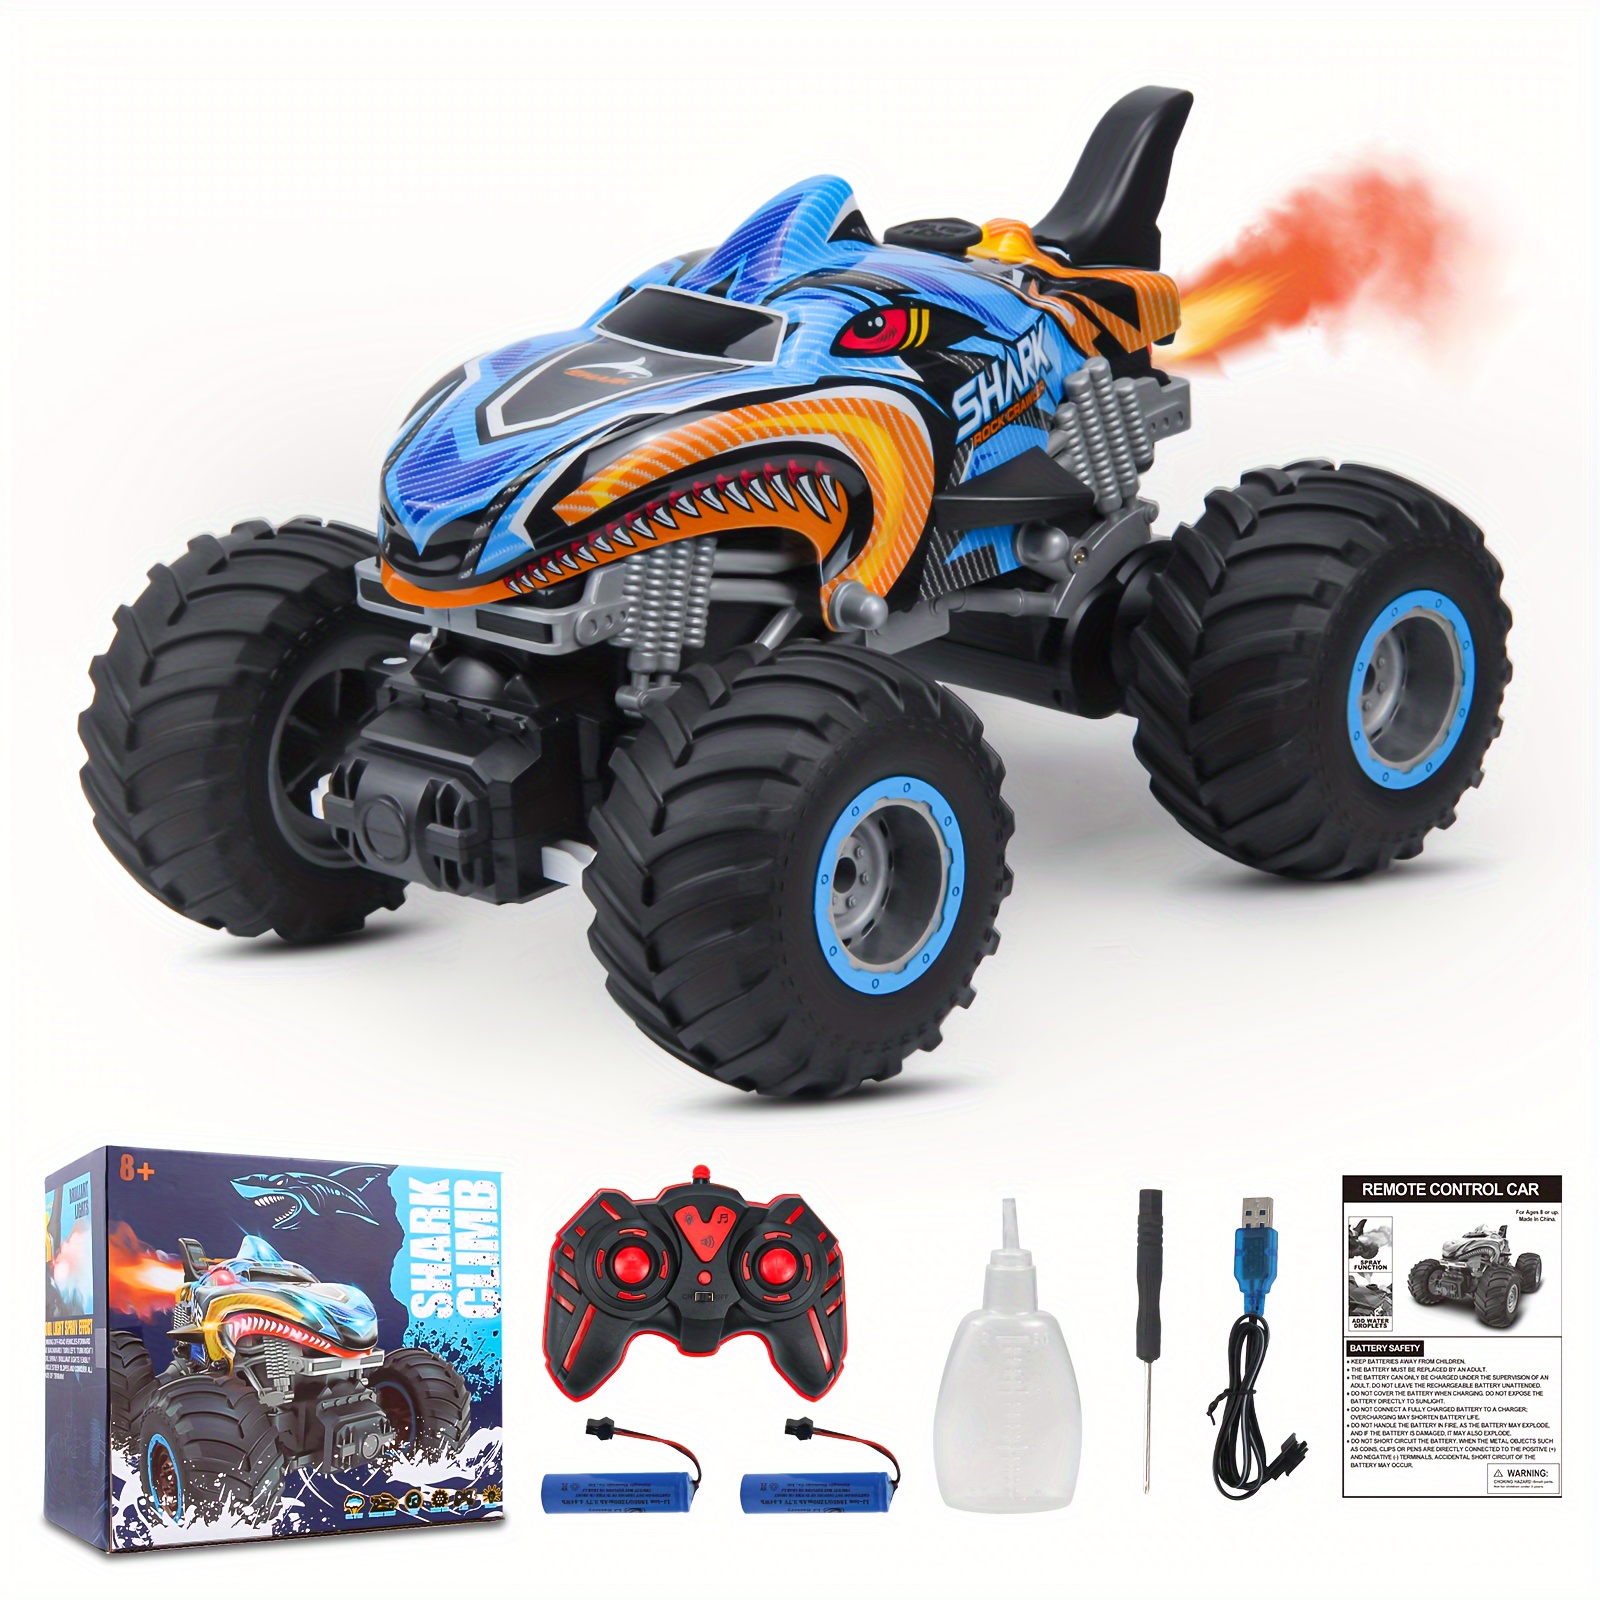 

1:16, 2.4 Ghz All Terrain Monster Truck, Rc Truck 2 Rechargeable Batteries For 80 Mins Play, Spray Remote Control Car For Boys 8-12 And Girls Or Adult, Mk724a